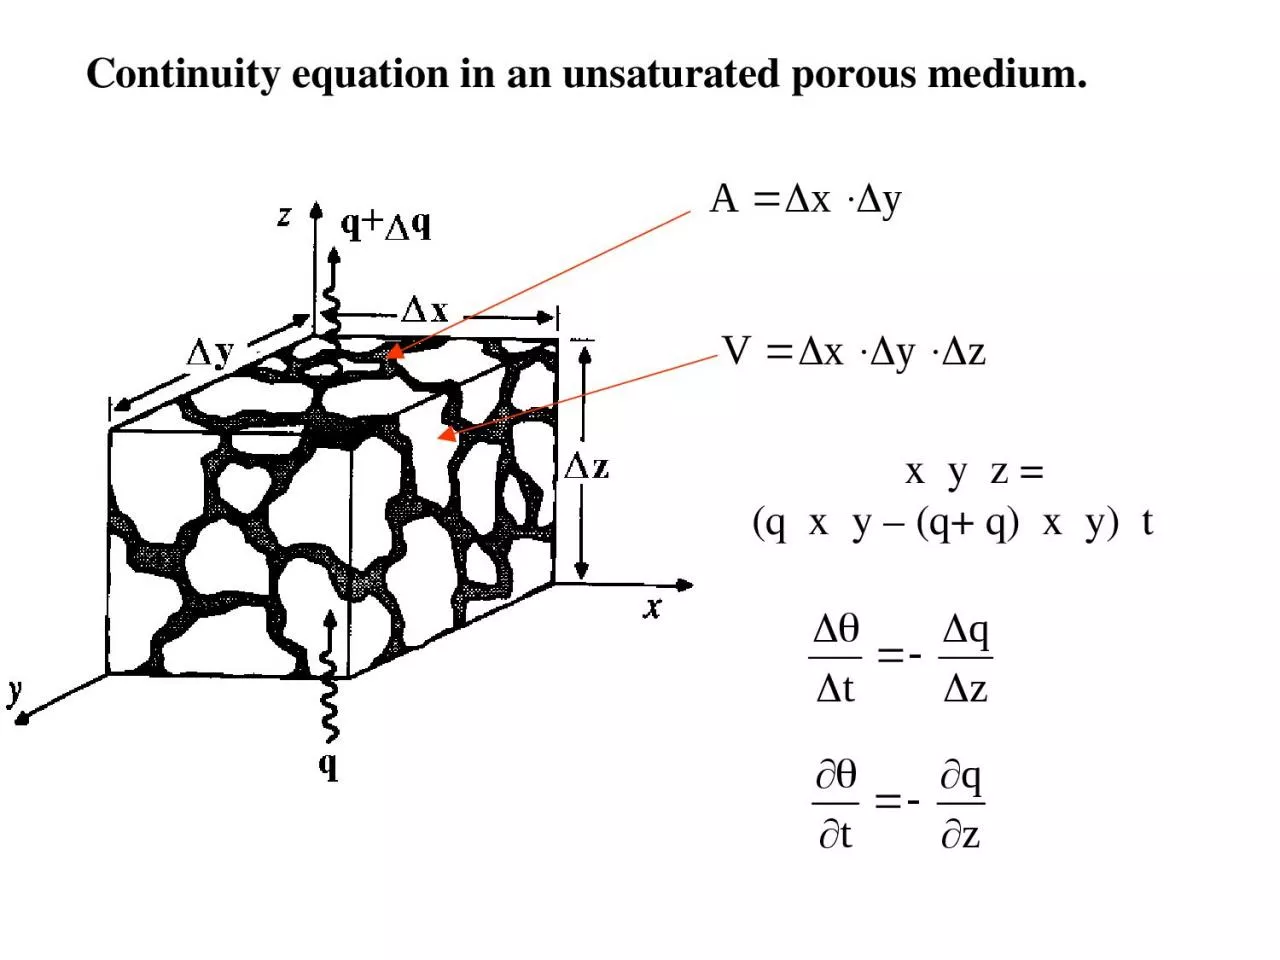 Continuity equation in an unsaturated porous medium.